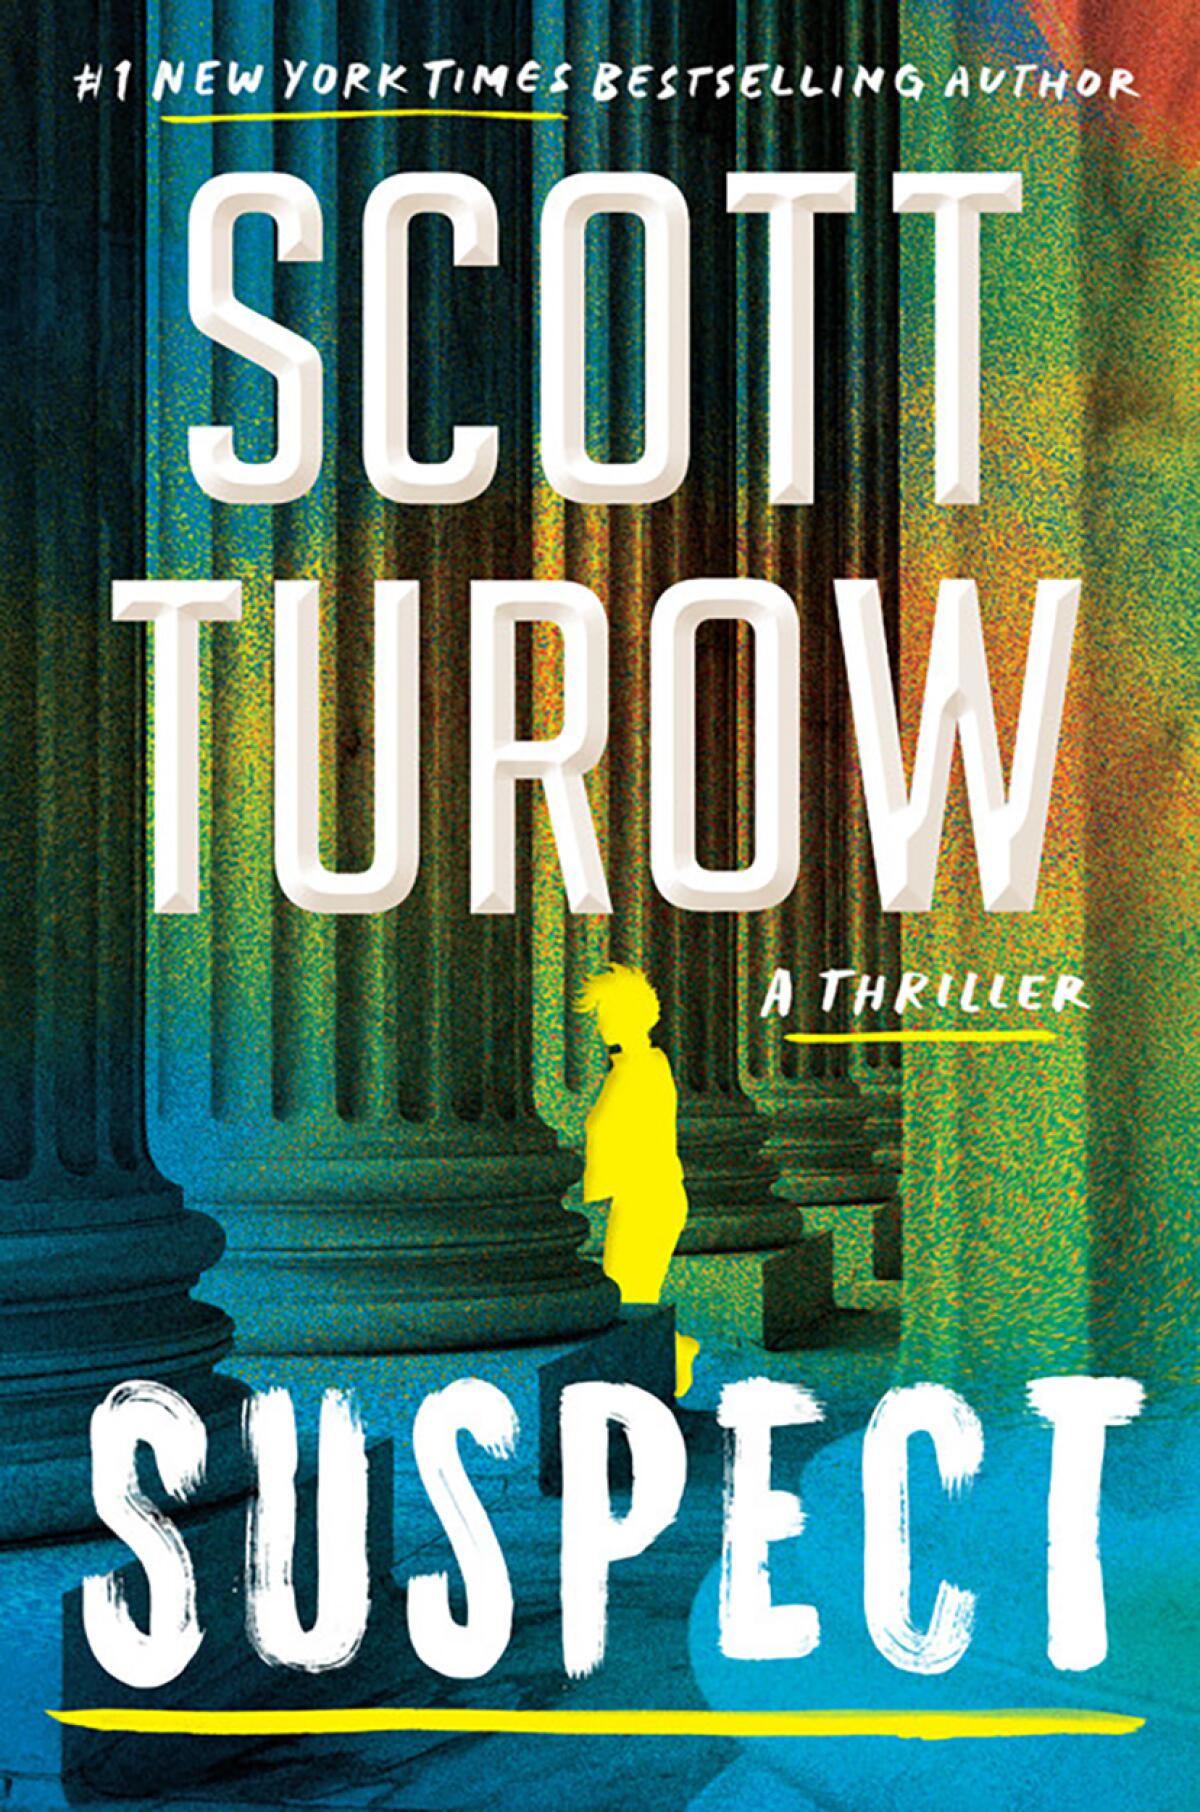 The cover of the book "Suspect" by Scott Turow shows a figure walking among huge classical columns.